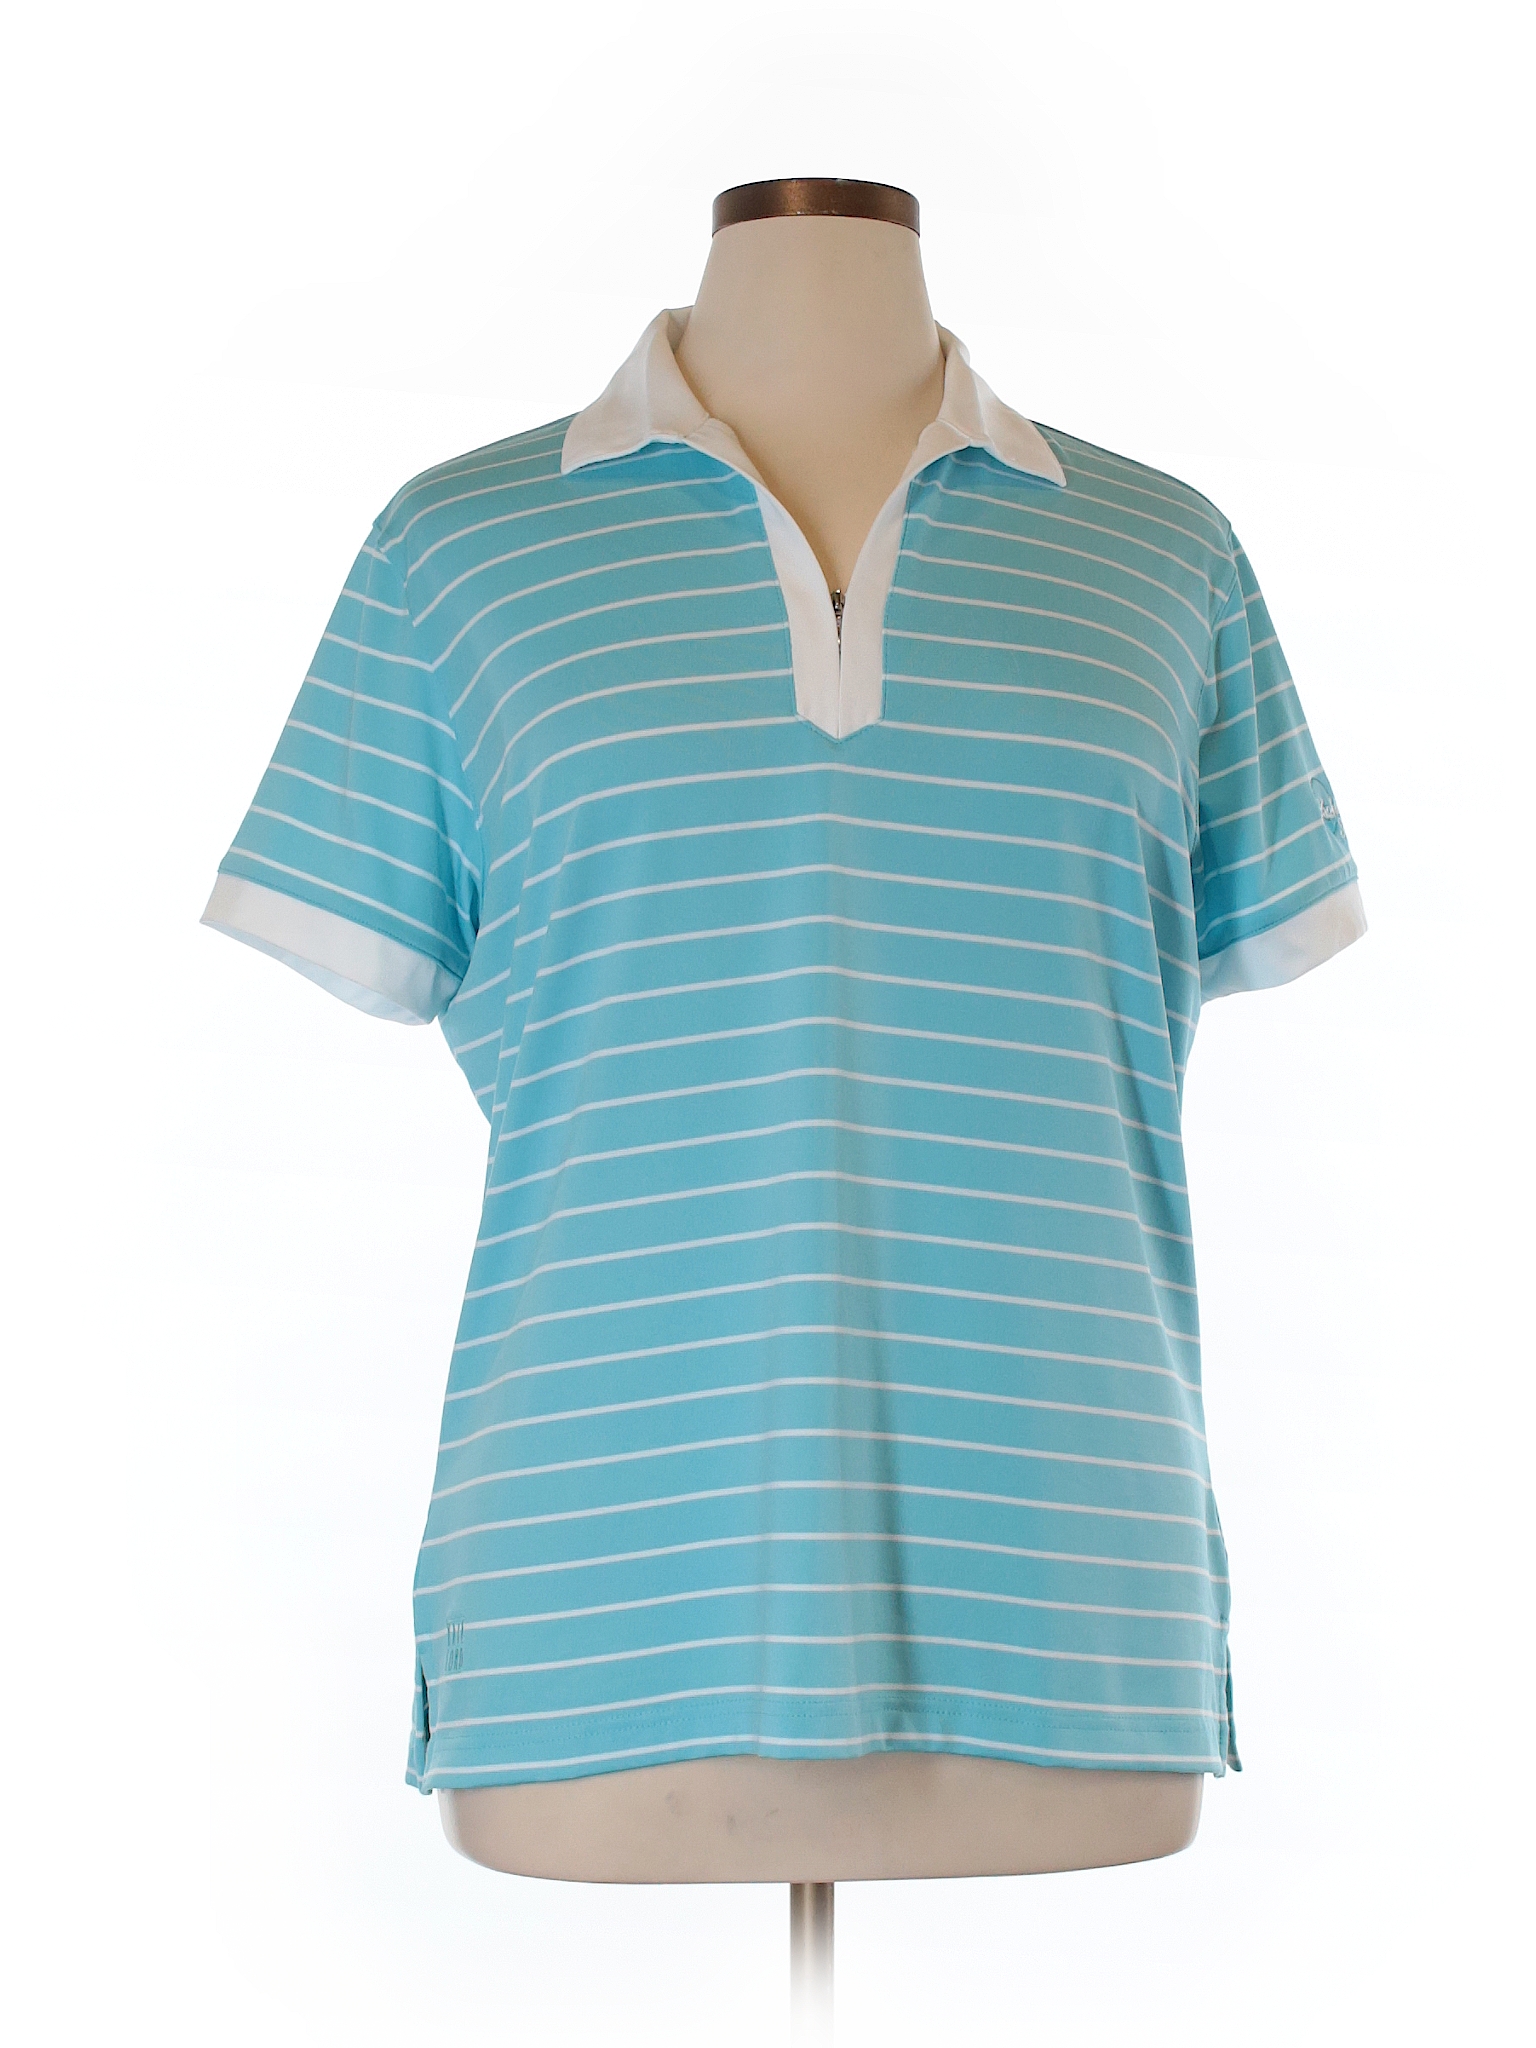 Kate Lord Stripes Blue Short Sleeve Top Size XL - 66% off | thredUP